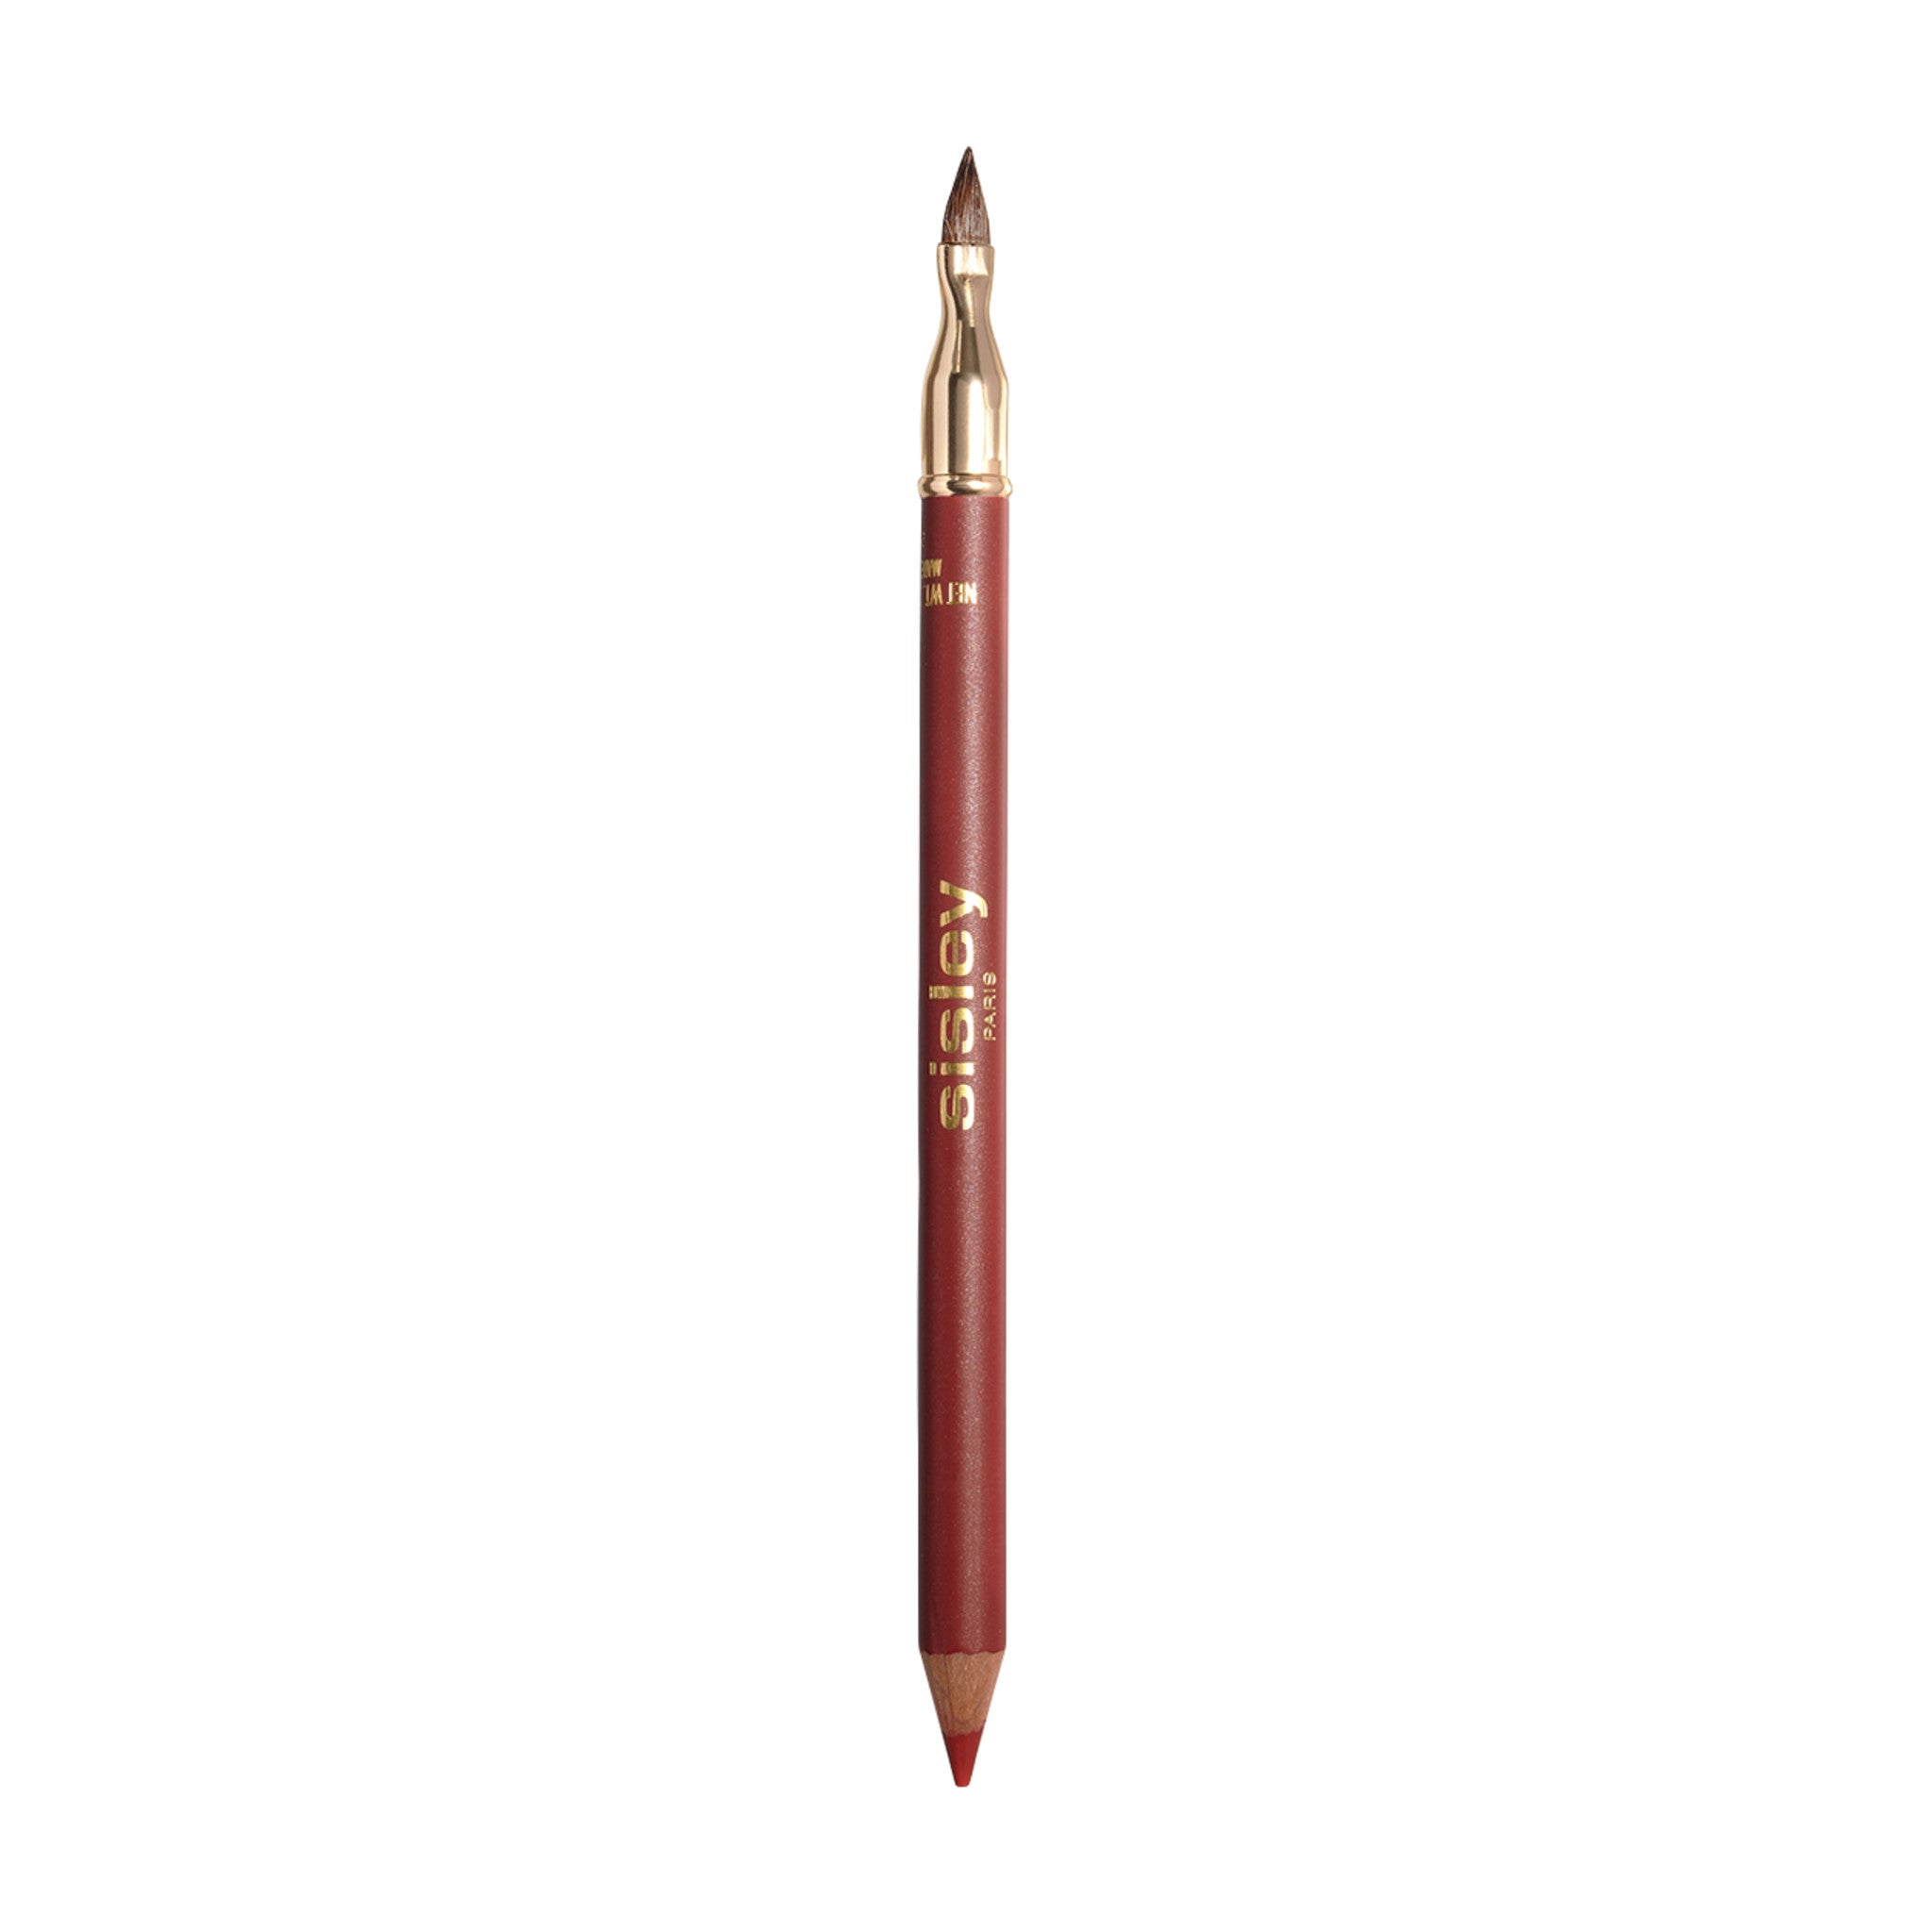 Sisley-Paris Phyto-Lèvres Perfect Lip Pencil Color/Shade variant: 10 Auburn main image. This product is in the color orange